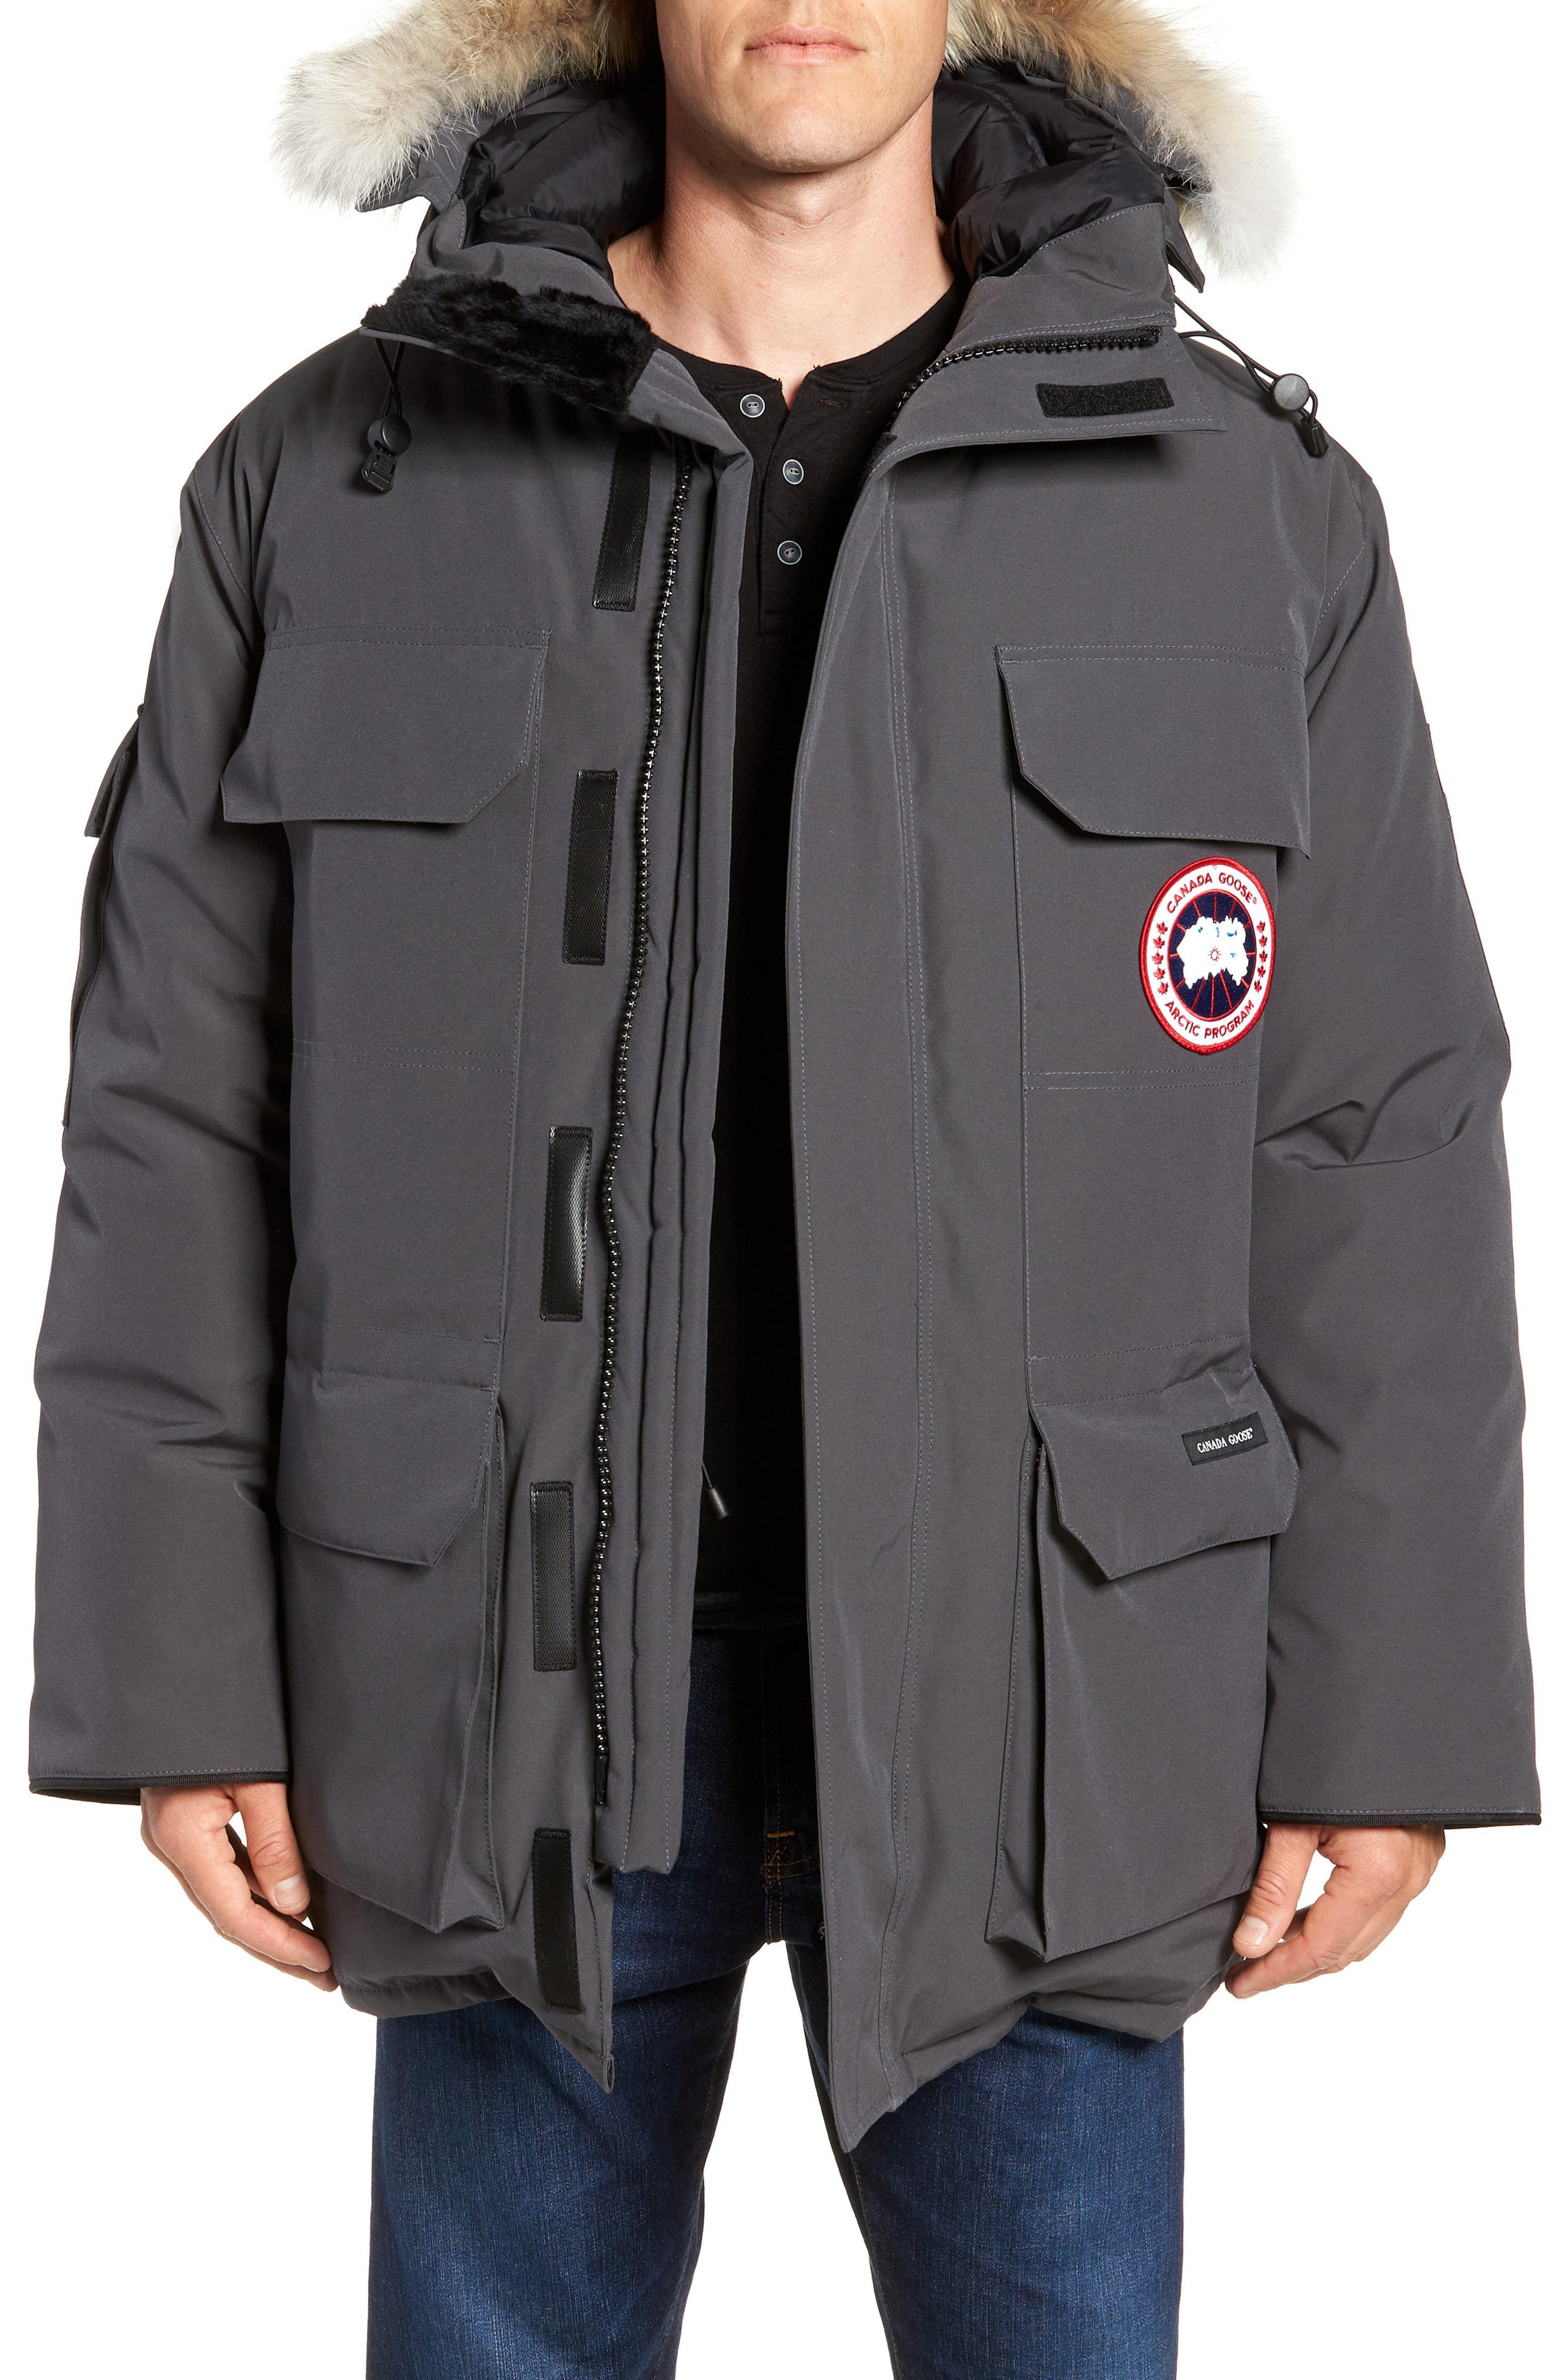 Lyst Canada Goose Pbi Expedition Regular Fit Down Parka With Genuine Coyote Fur Trim In Gray